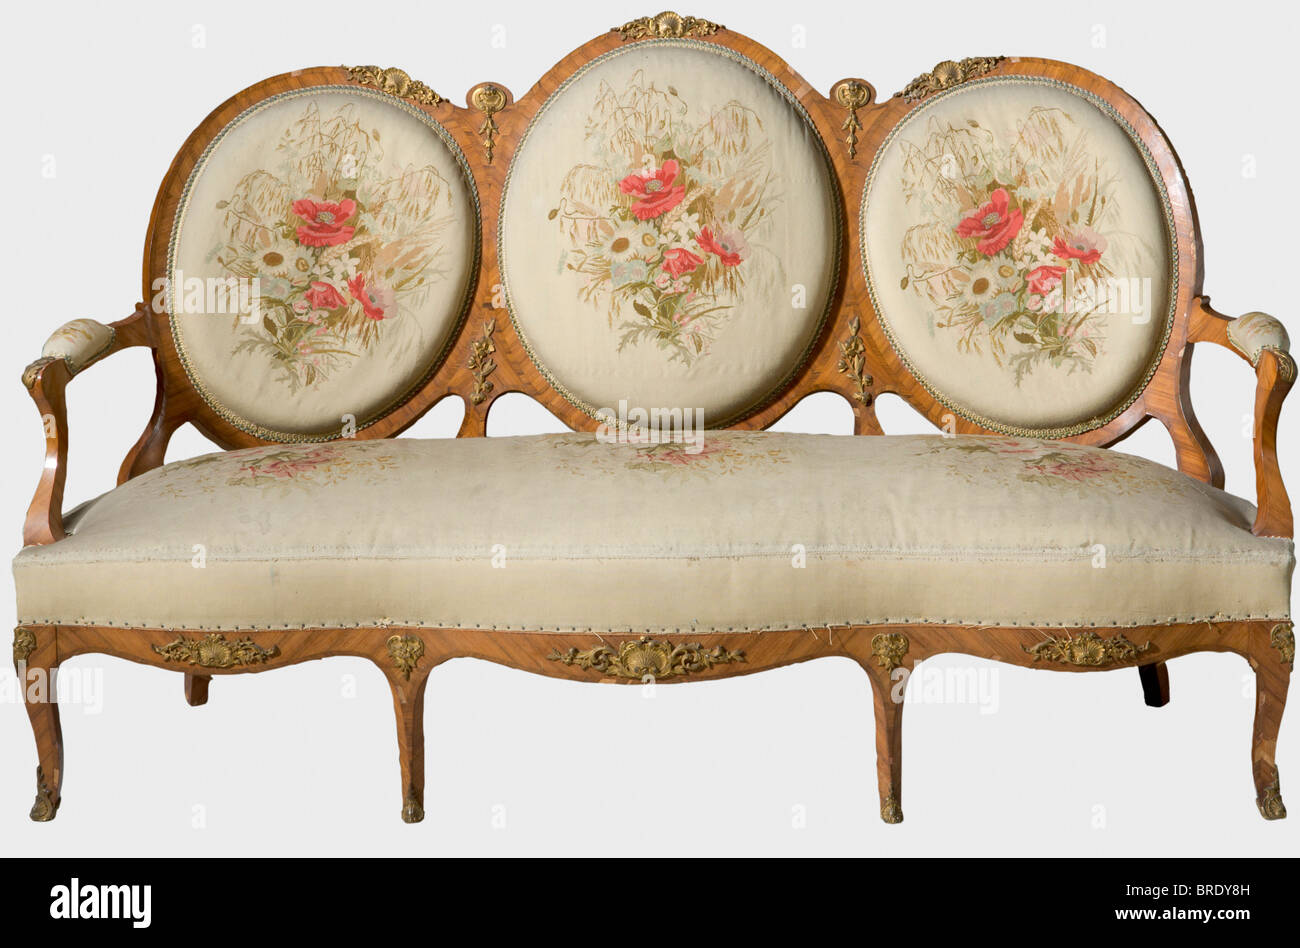 A lounge suite with rosewood veneer Gambs Workshop, Saint Petersburg, 1846, Rosewood veneer, cream-coloured brocade with flower ornaments, gilt bronze fittings, gold fringes and braids. Some losses and additions. Consisting of a three seater couch (105 x 171 x 73 cm), a two seater couch (100 x 125 x 64 cm), two recliners (96 x 61 x 55 cm), one chair (93 x 50 x 51 cm/one chair leg damaged) with two front wheels, one stool with wheels (diameter 48 cm, height 43 cm), and two matching pillows (50 x 50 cm). All pieces with several inventory labels such as 'ON' or 'O, Stock Photo